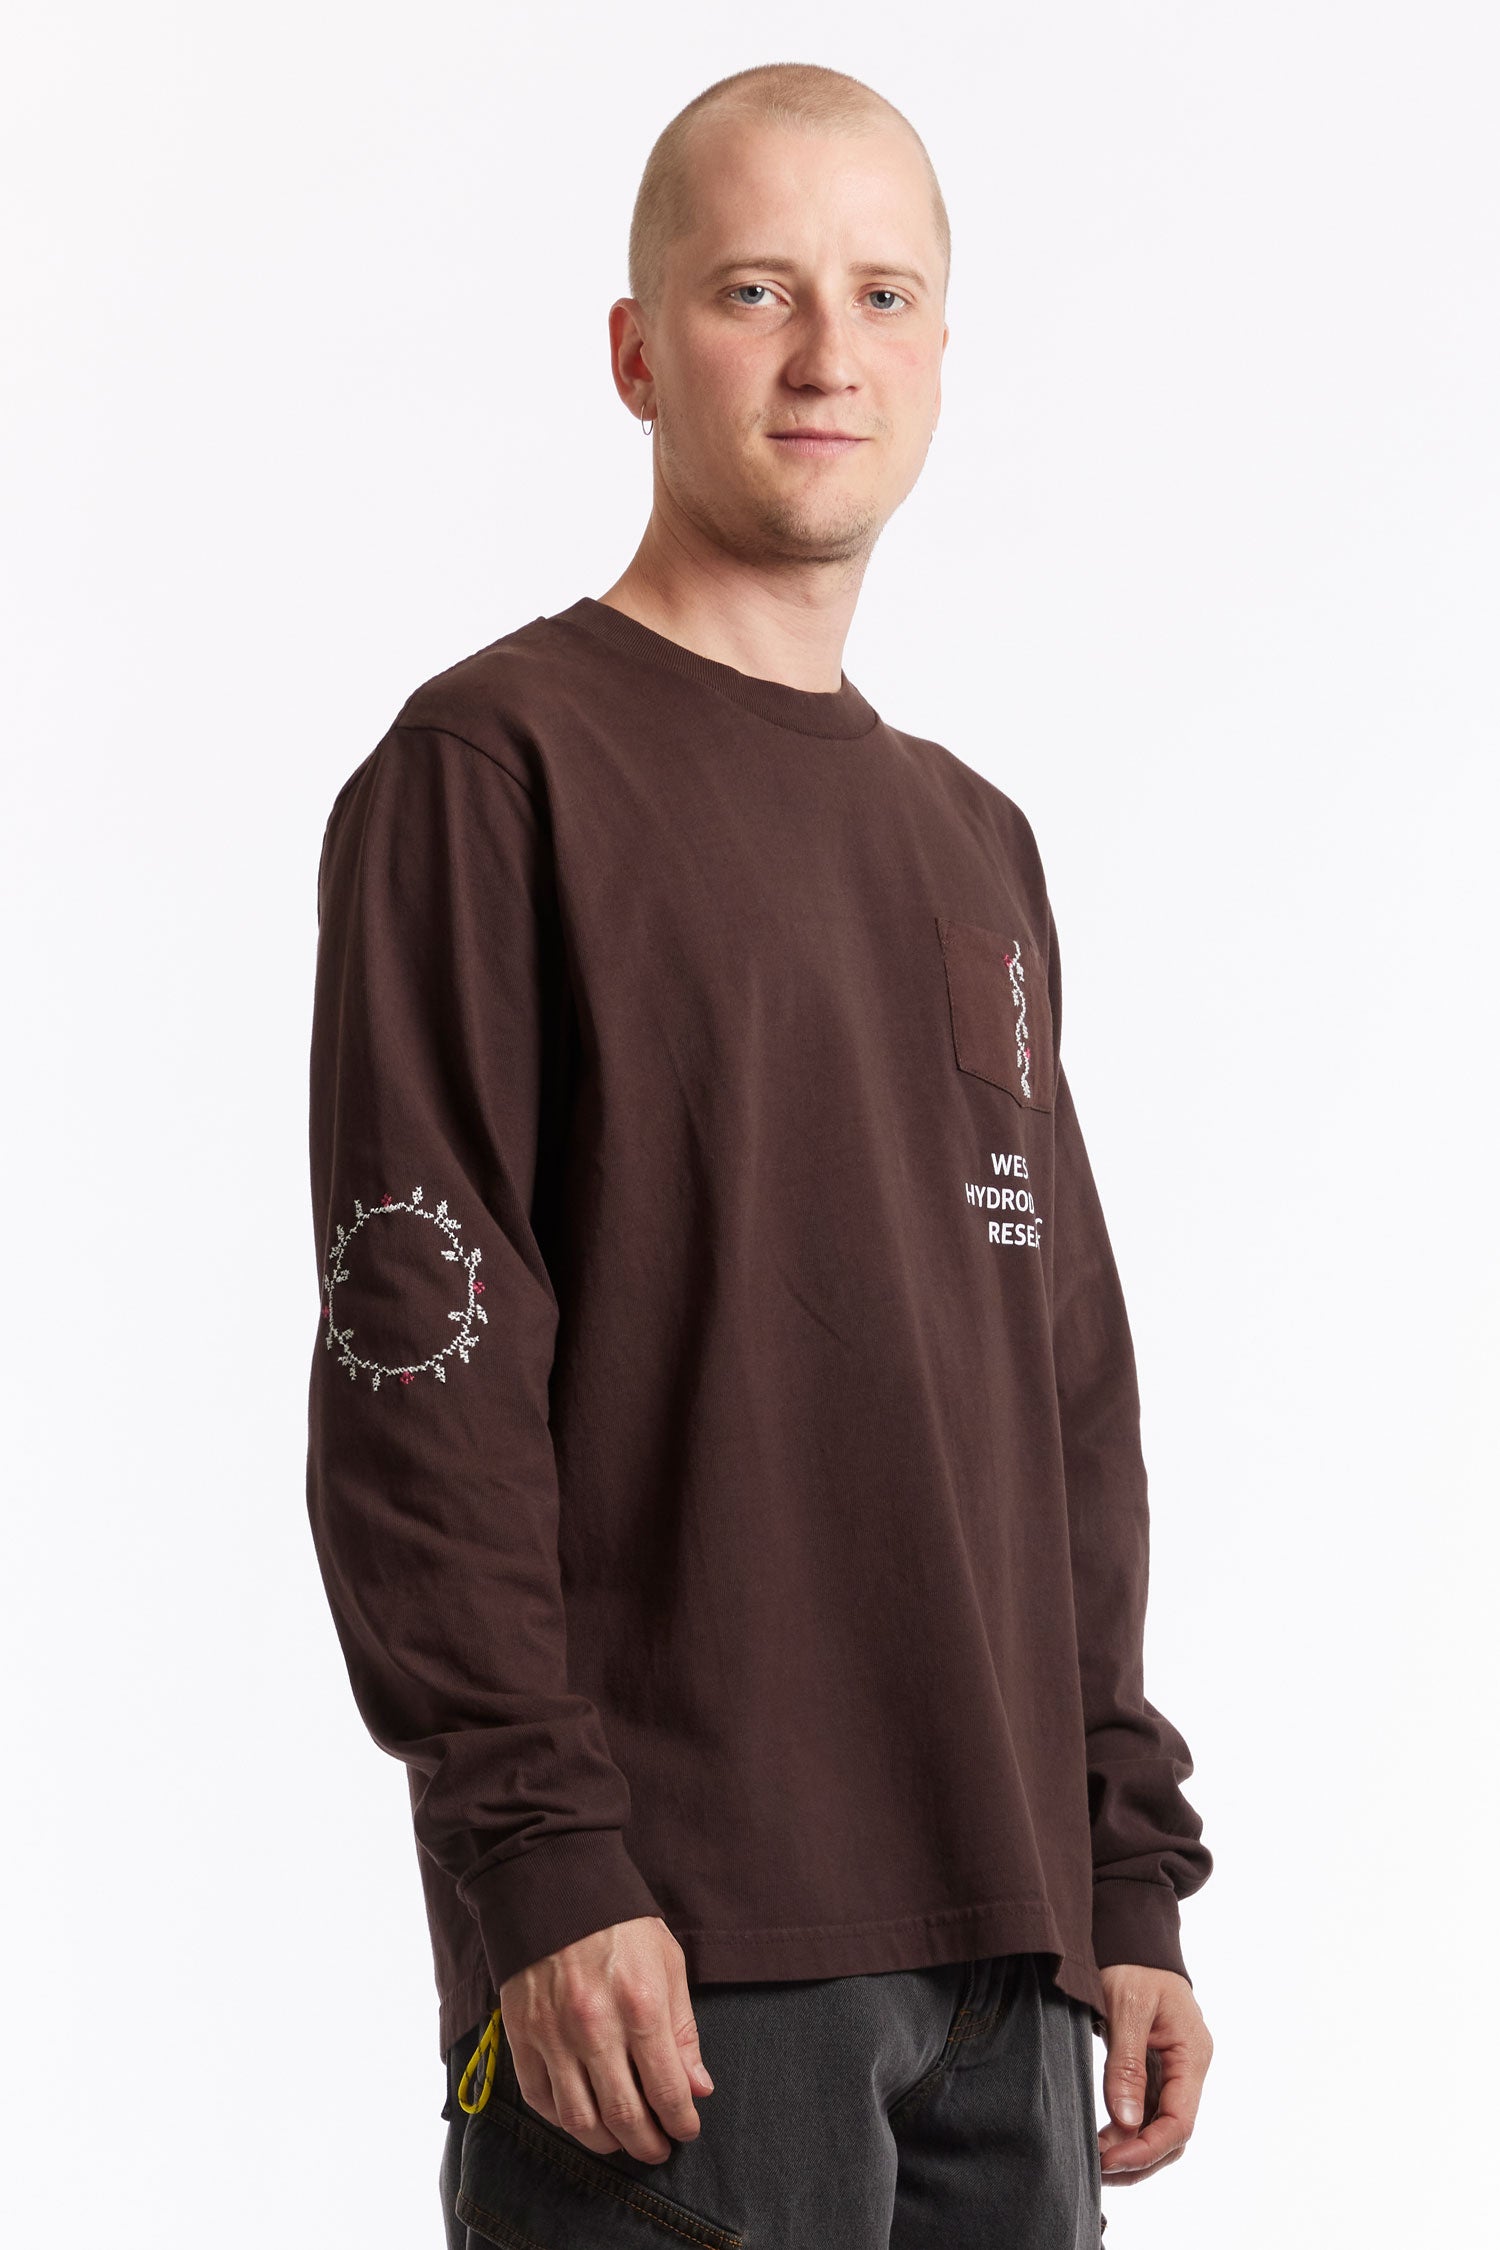 The ADISH - ADISH x WESTERN HYDRODYNAMIC RESEARCH NAFNUF LOGO LONG SLEEVE SHIRT  available online with global shipping, and in PAM Stores Melbourne and Sydney.